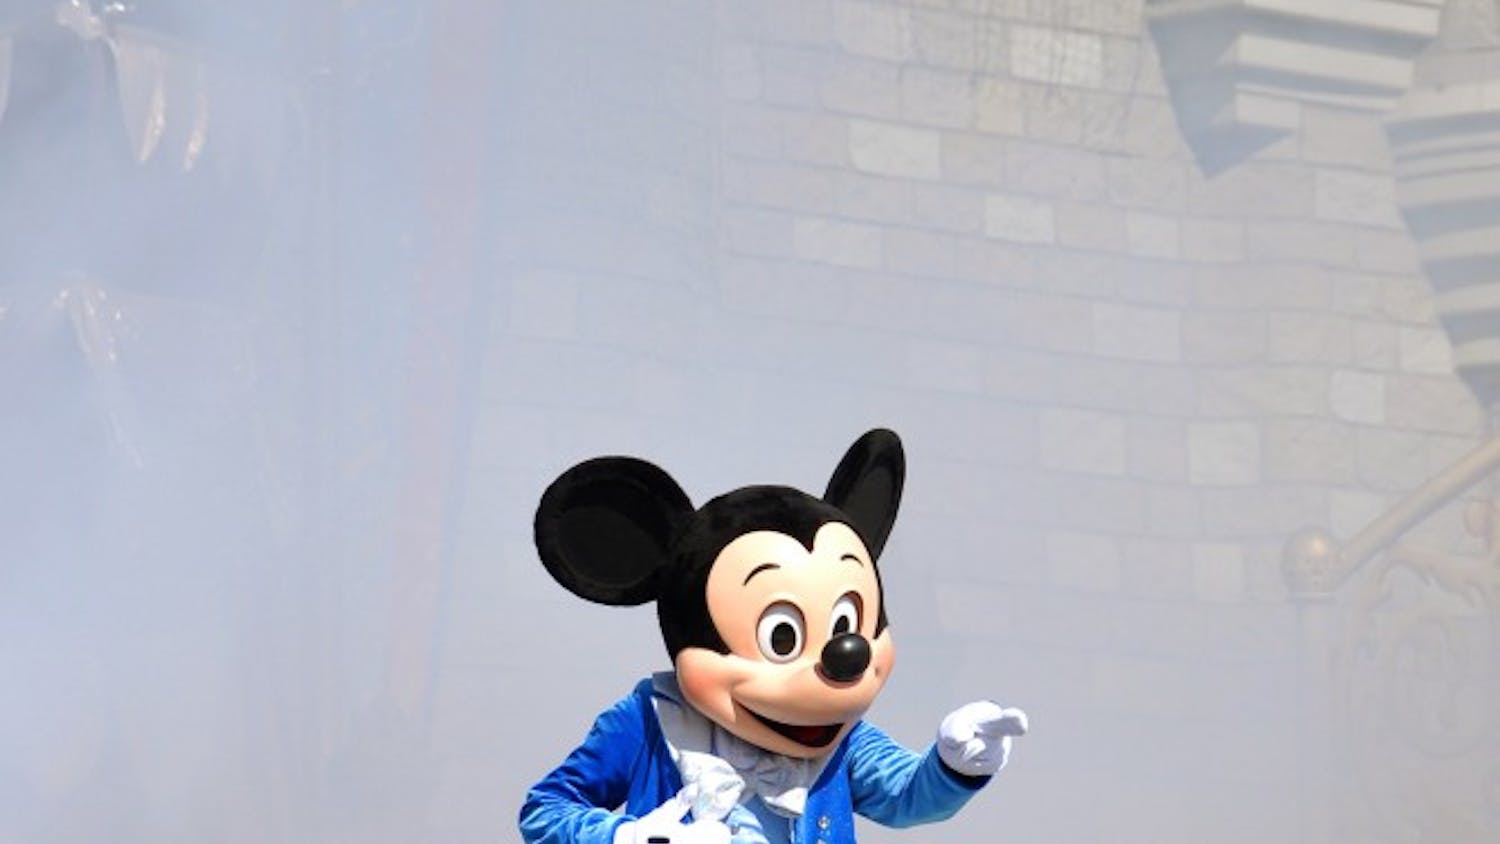 Mickey Mouse in Dream Along with Mickey show in Disney World, Orlando, Fla. (Dreamstime/TNS)